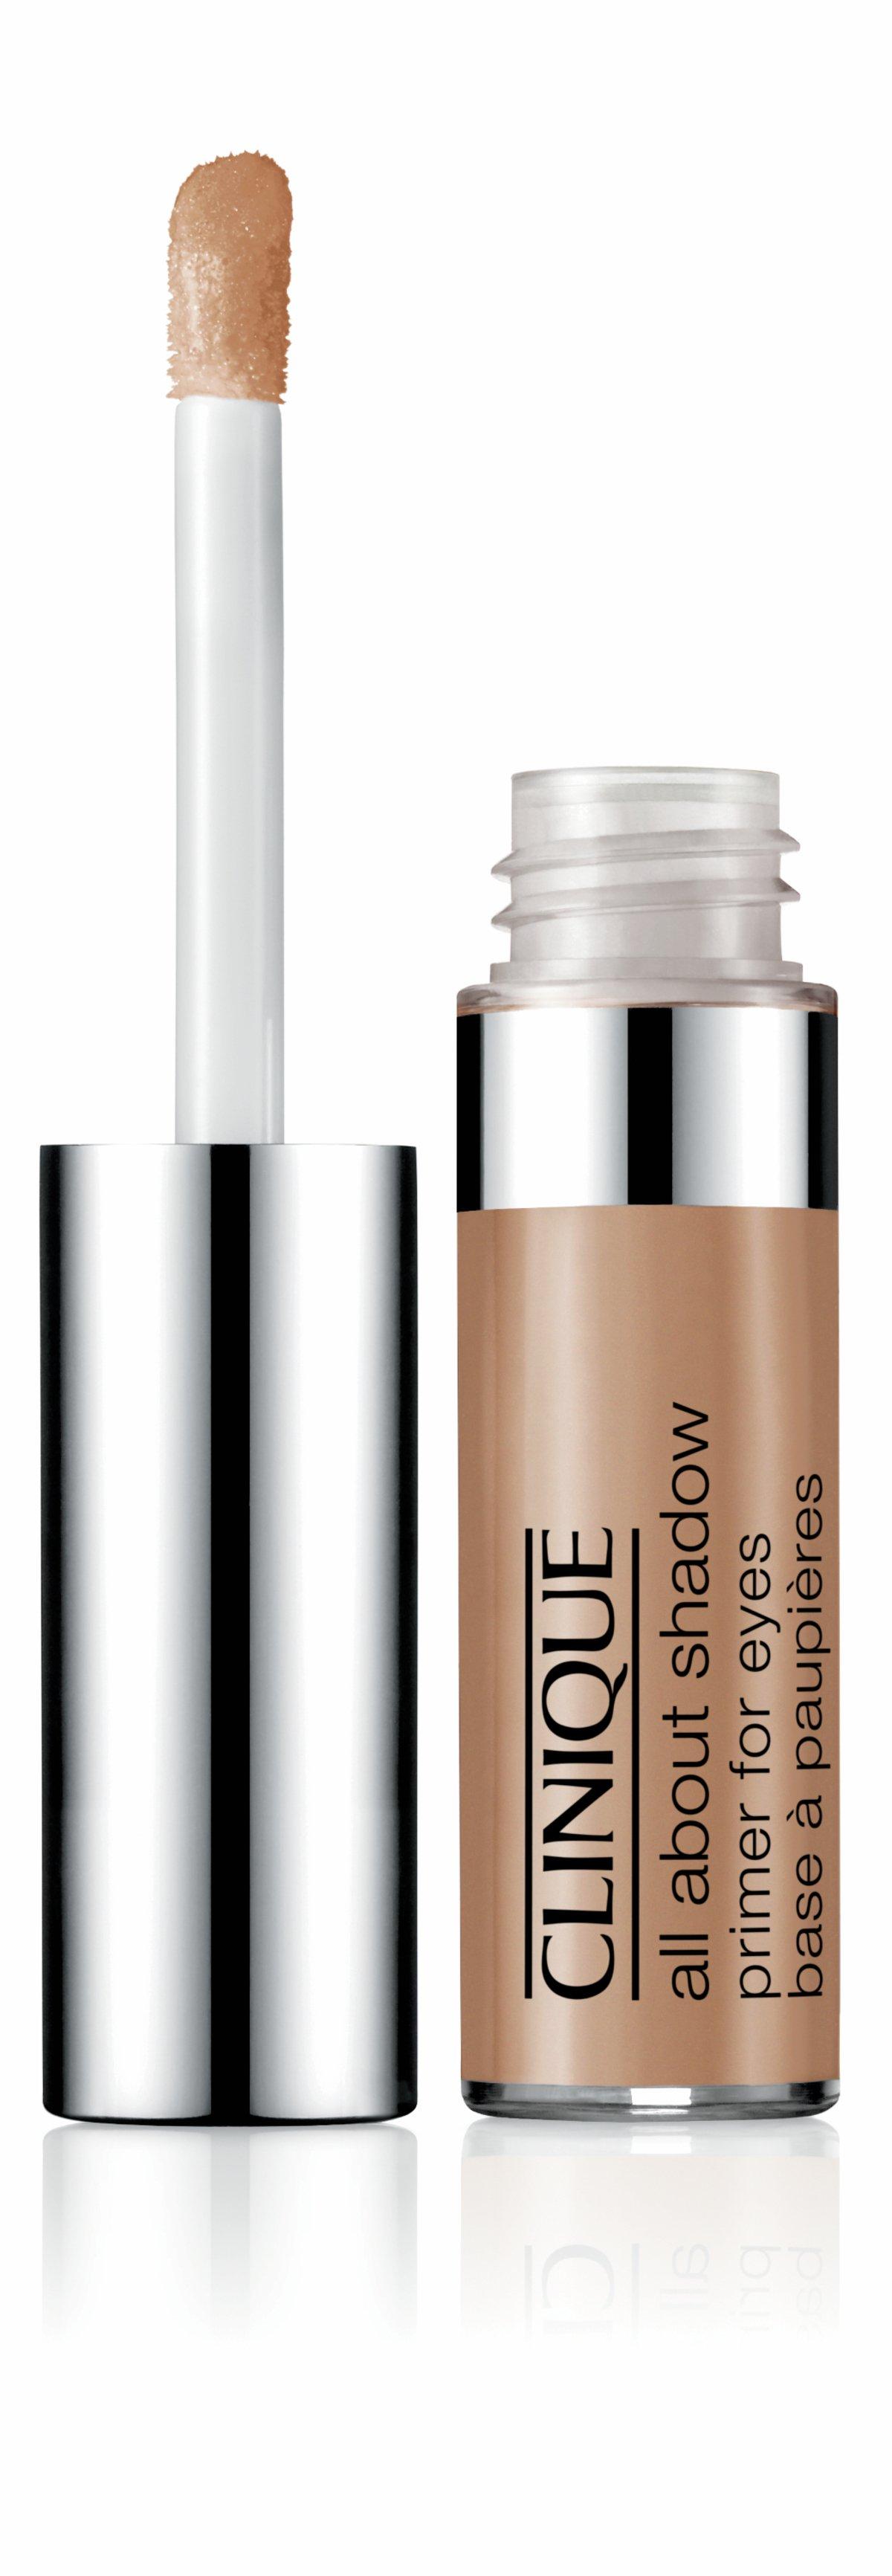 All About Shadow Primer For Eyes - 01 Very Fair